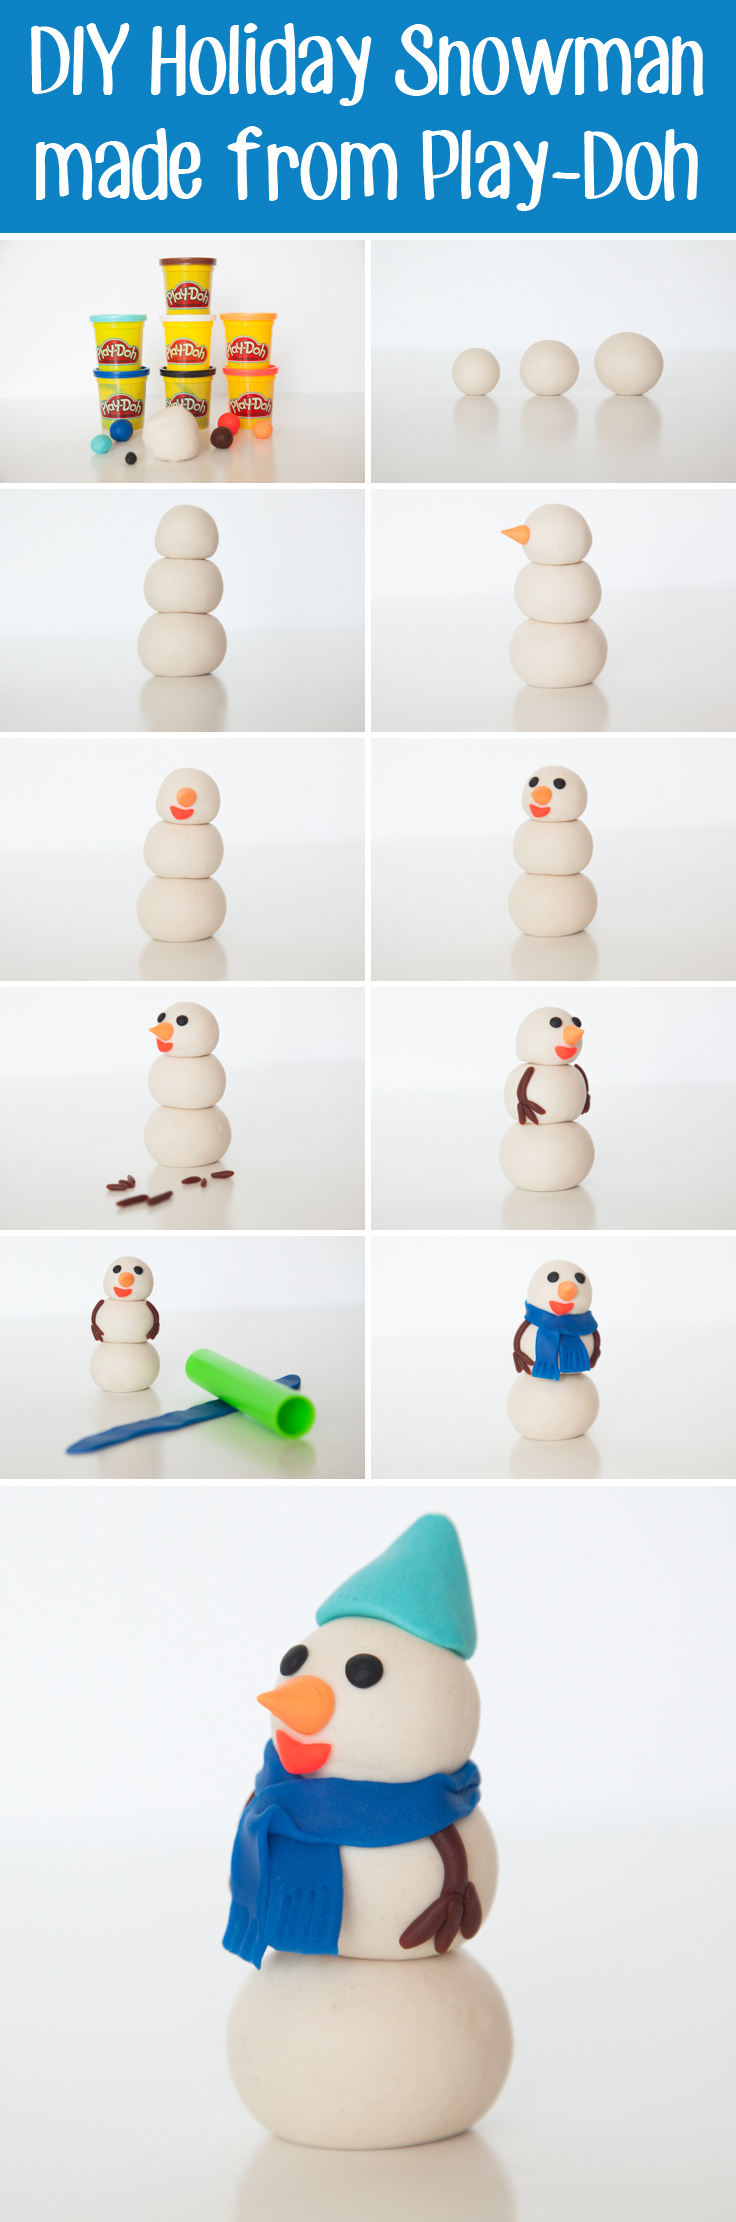 How to make a DIY snowman from Play-Doh compound! Inspiration for fun winter-themed kids crafts.